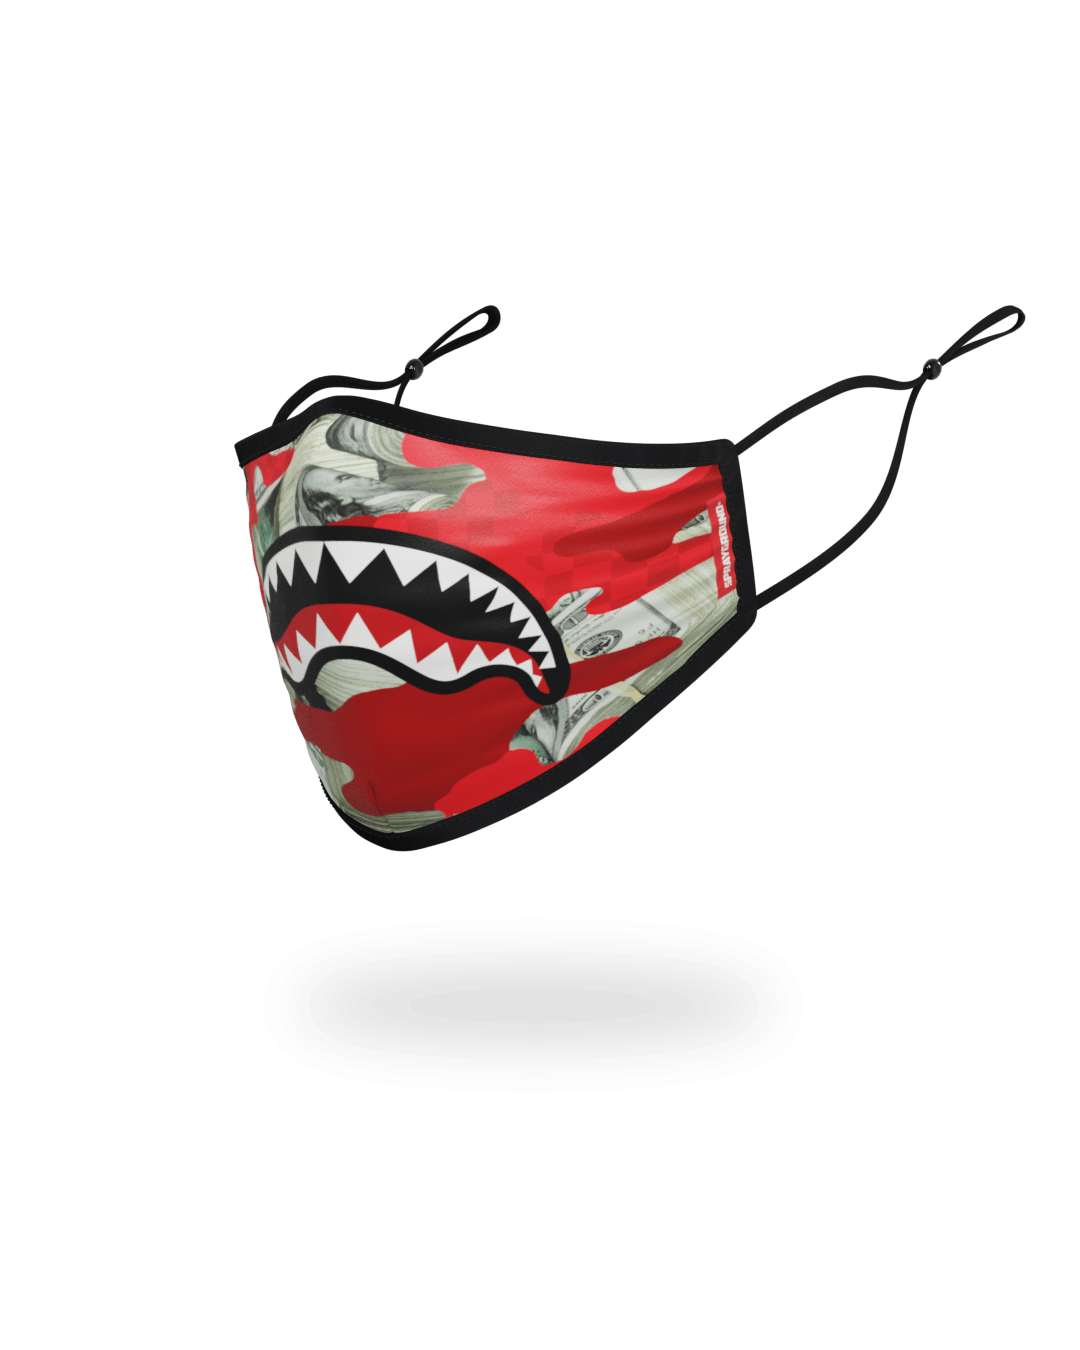 Discount | Adult Money Camo (Red) Form-Fitting Face Mask Sprayground Sale - Discount | Adult Money Camo (Red) Form-Fitting Face Mask Sprayground Sale-04-1